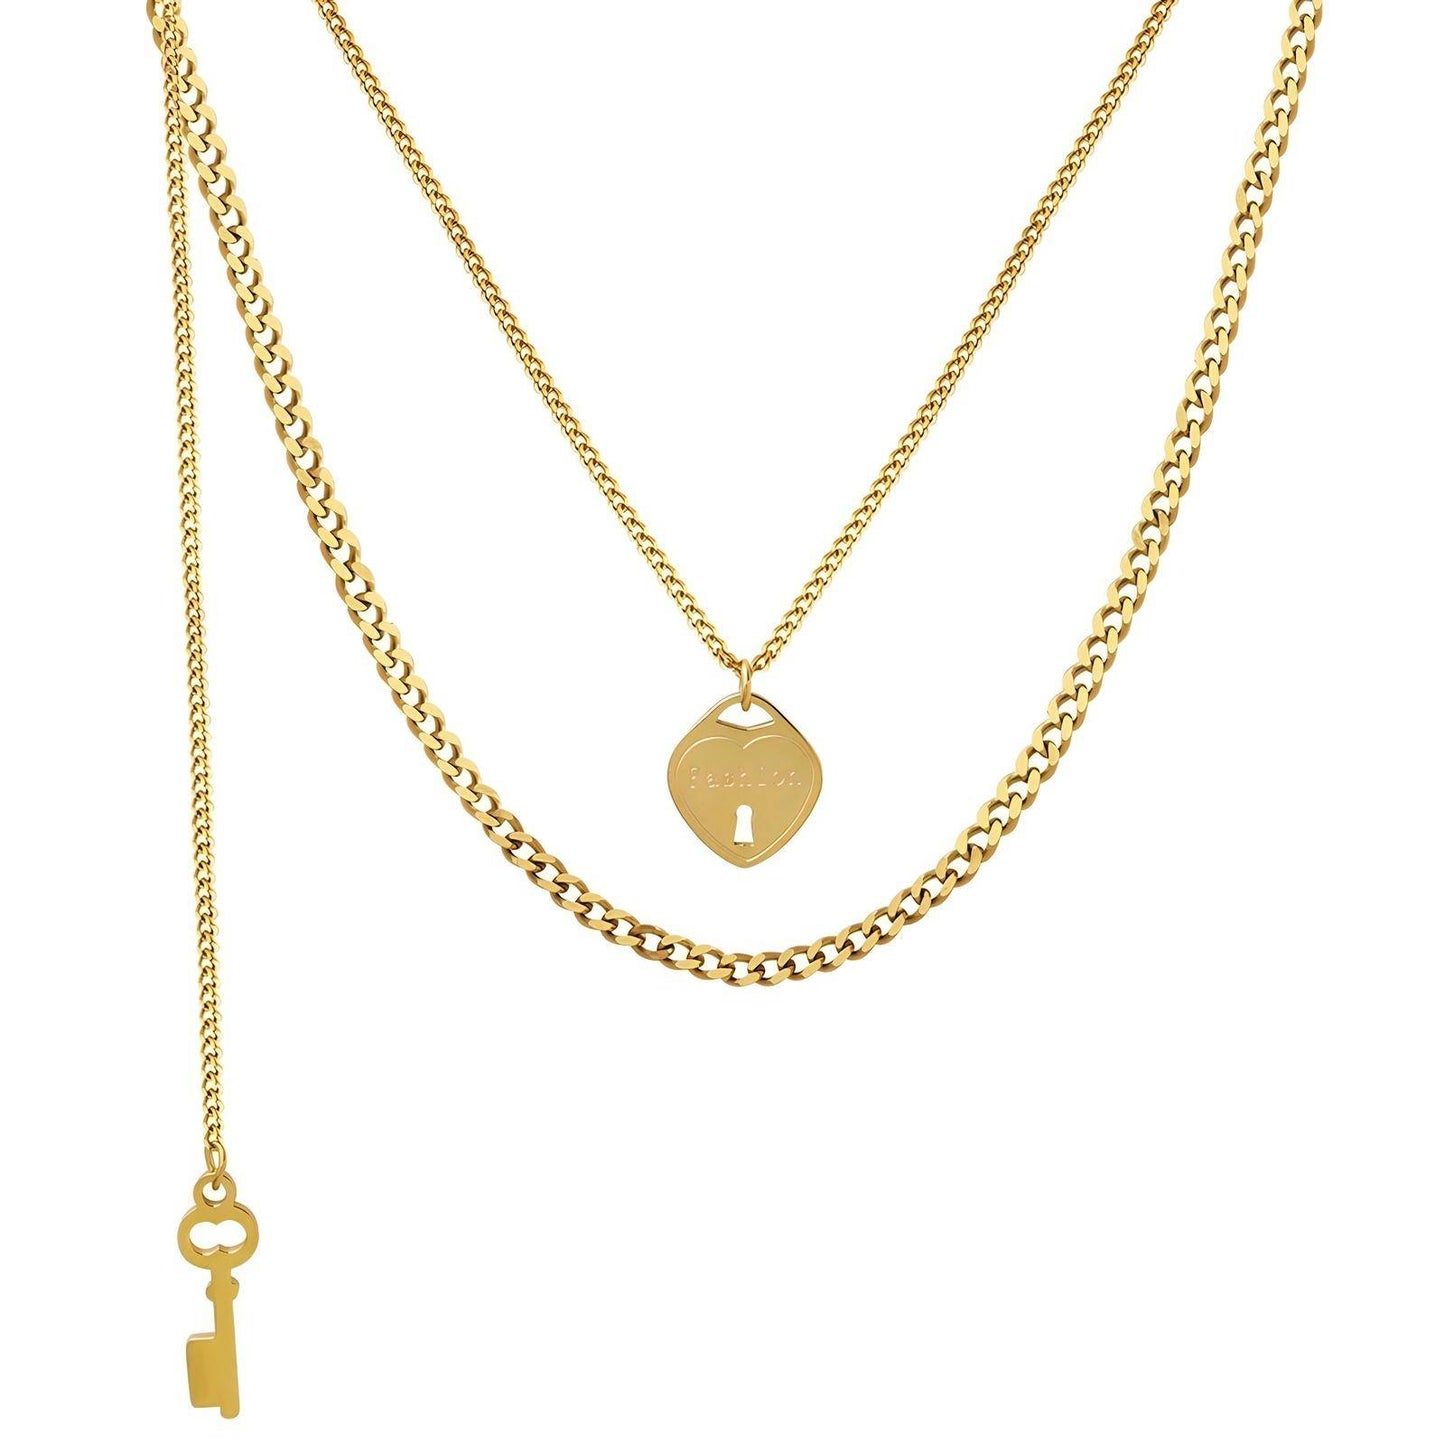 18K gold plated Stainless steel  Lock and key necklace